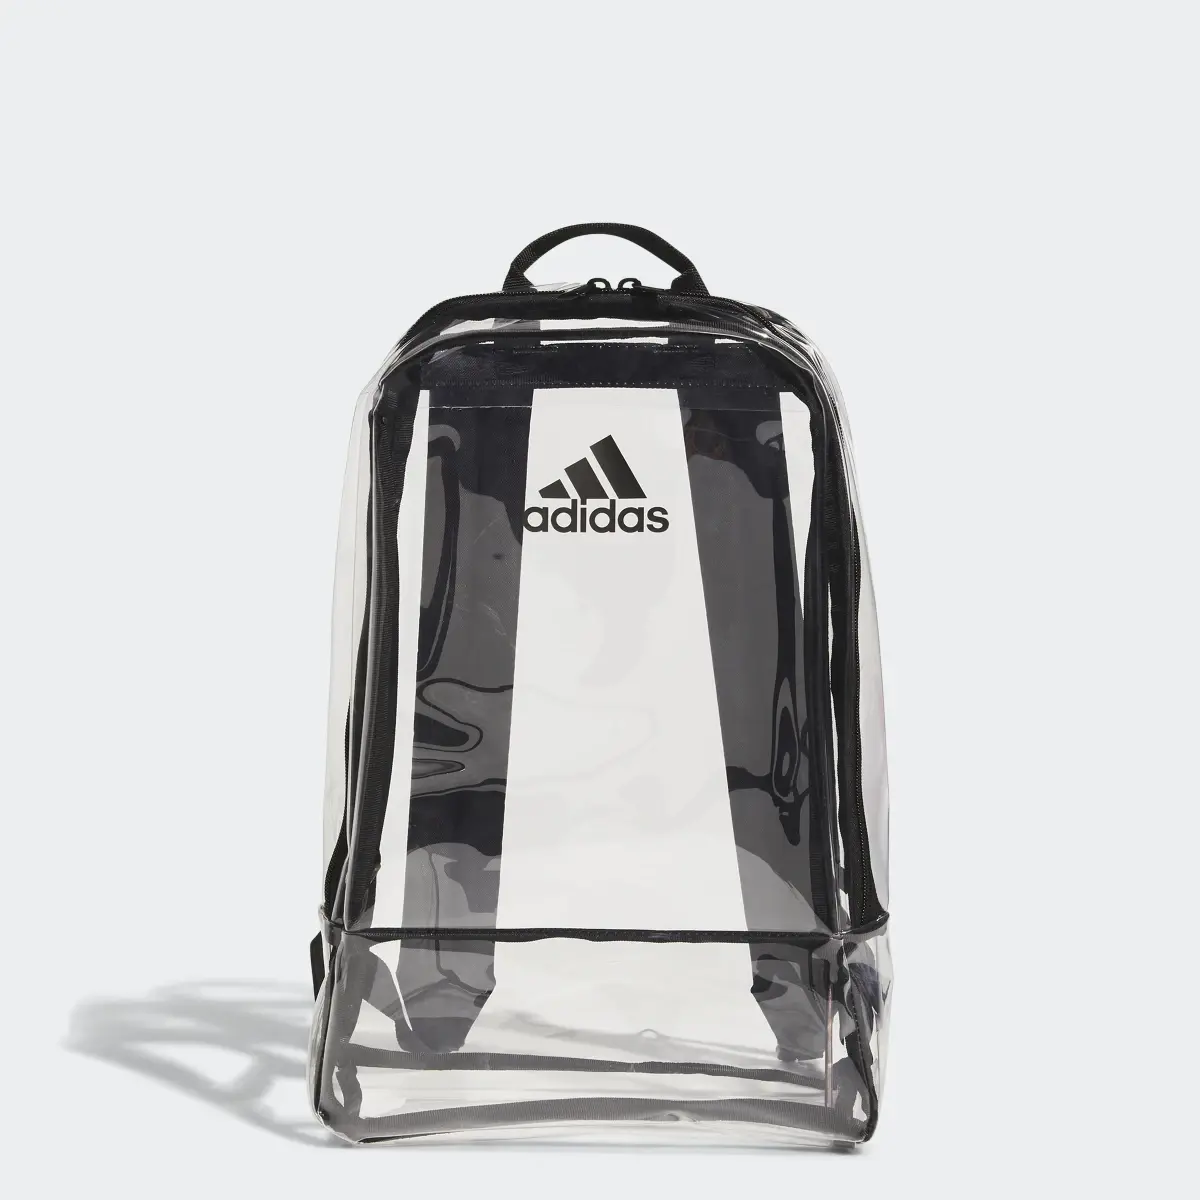 Adidas Clear Backpack. 1